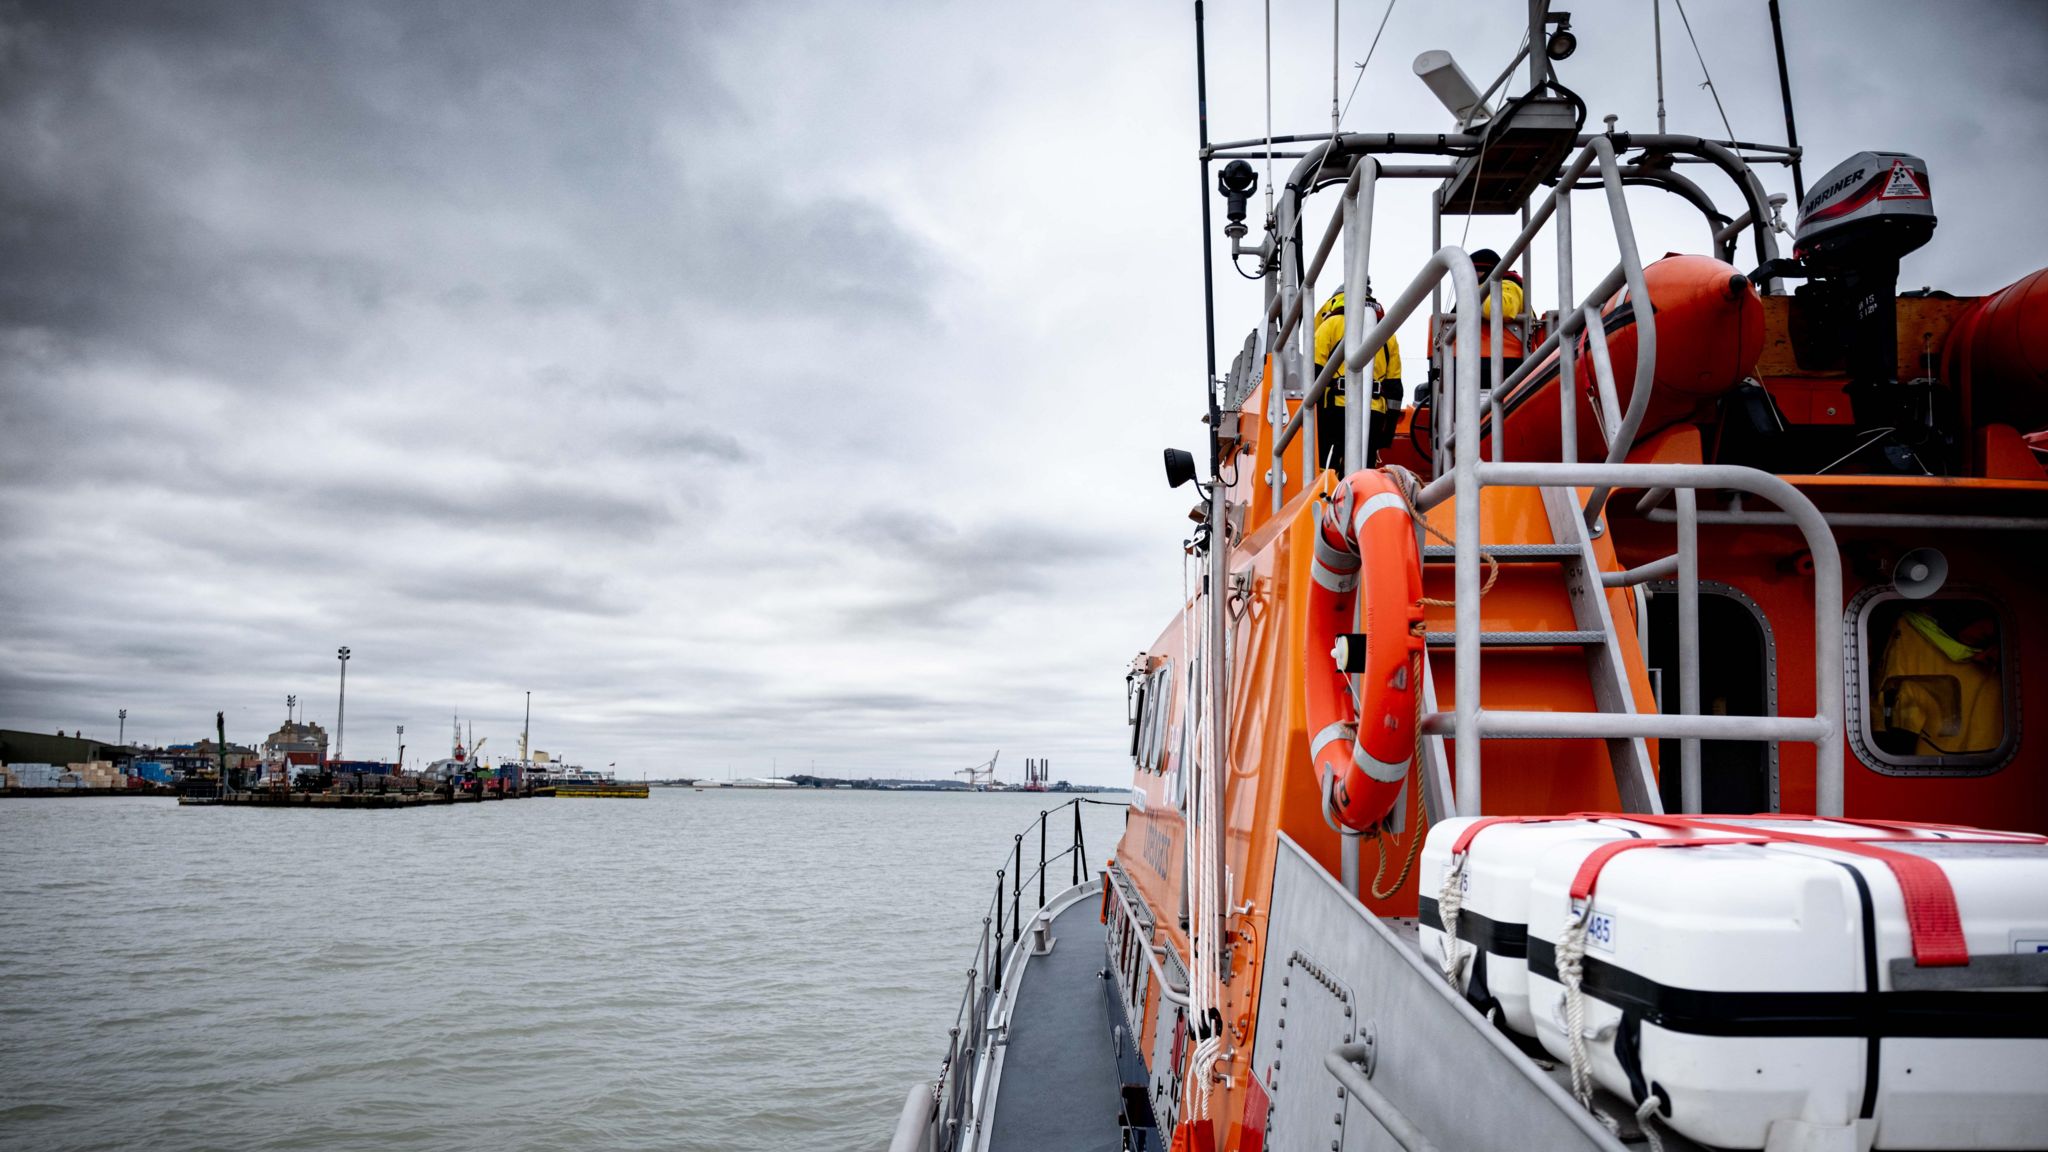 RNLI Harwich all-weather lifeboat launching to rescue rowers